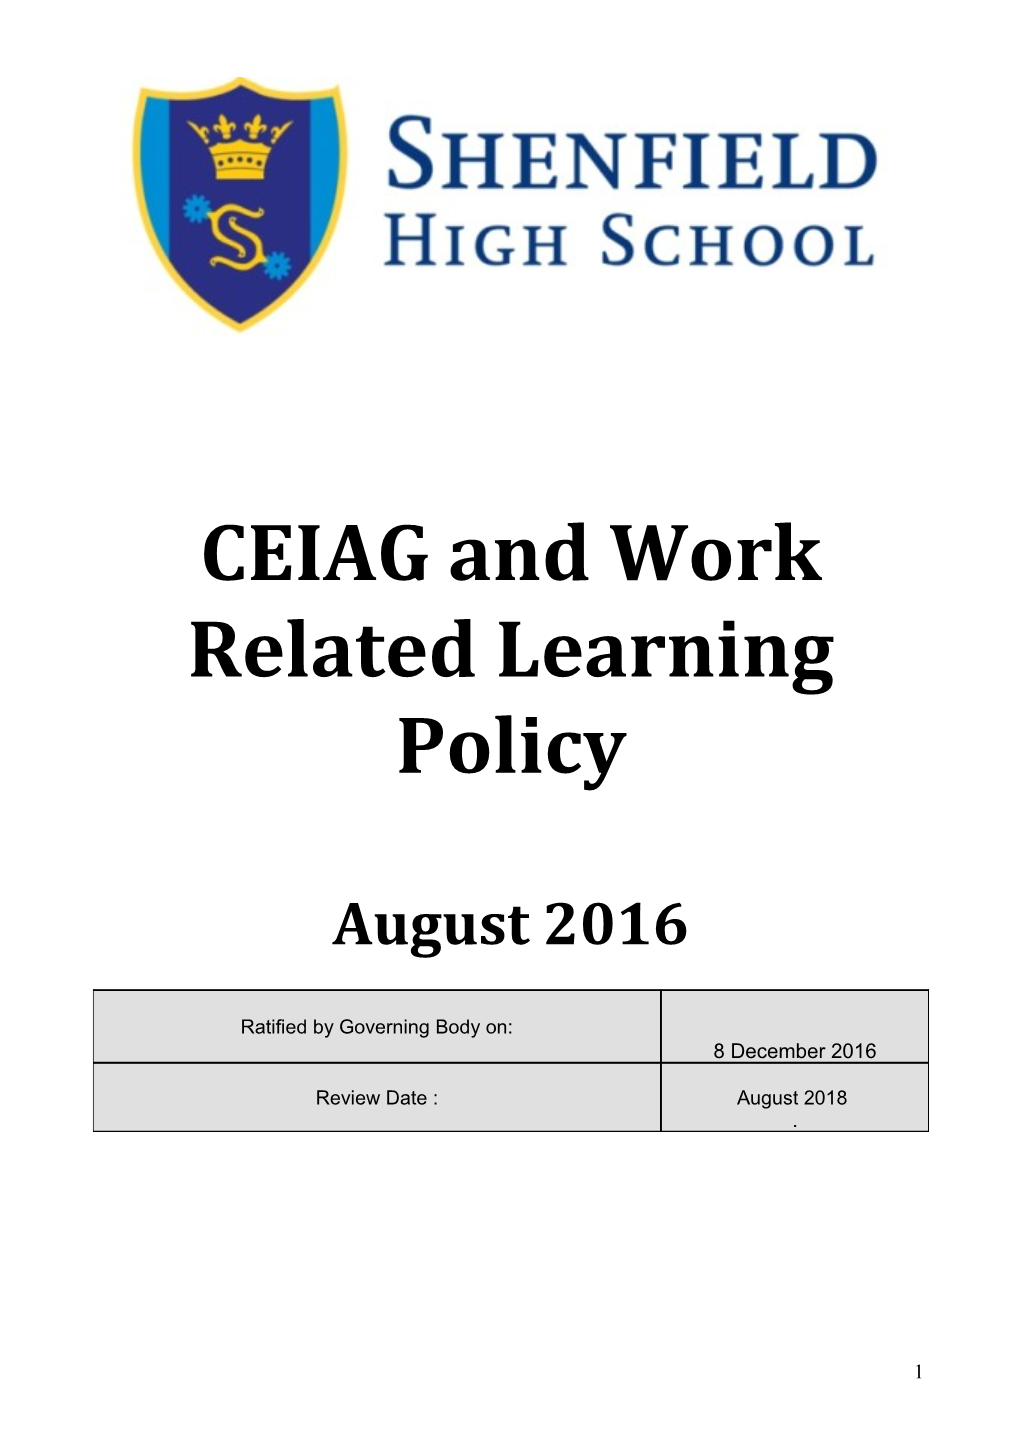 CEIAG and Work Related Learning Policy